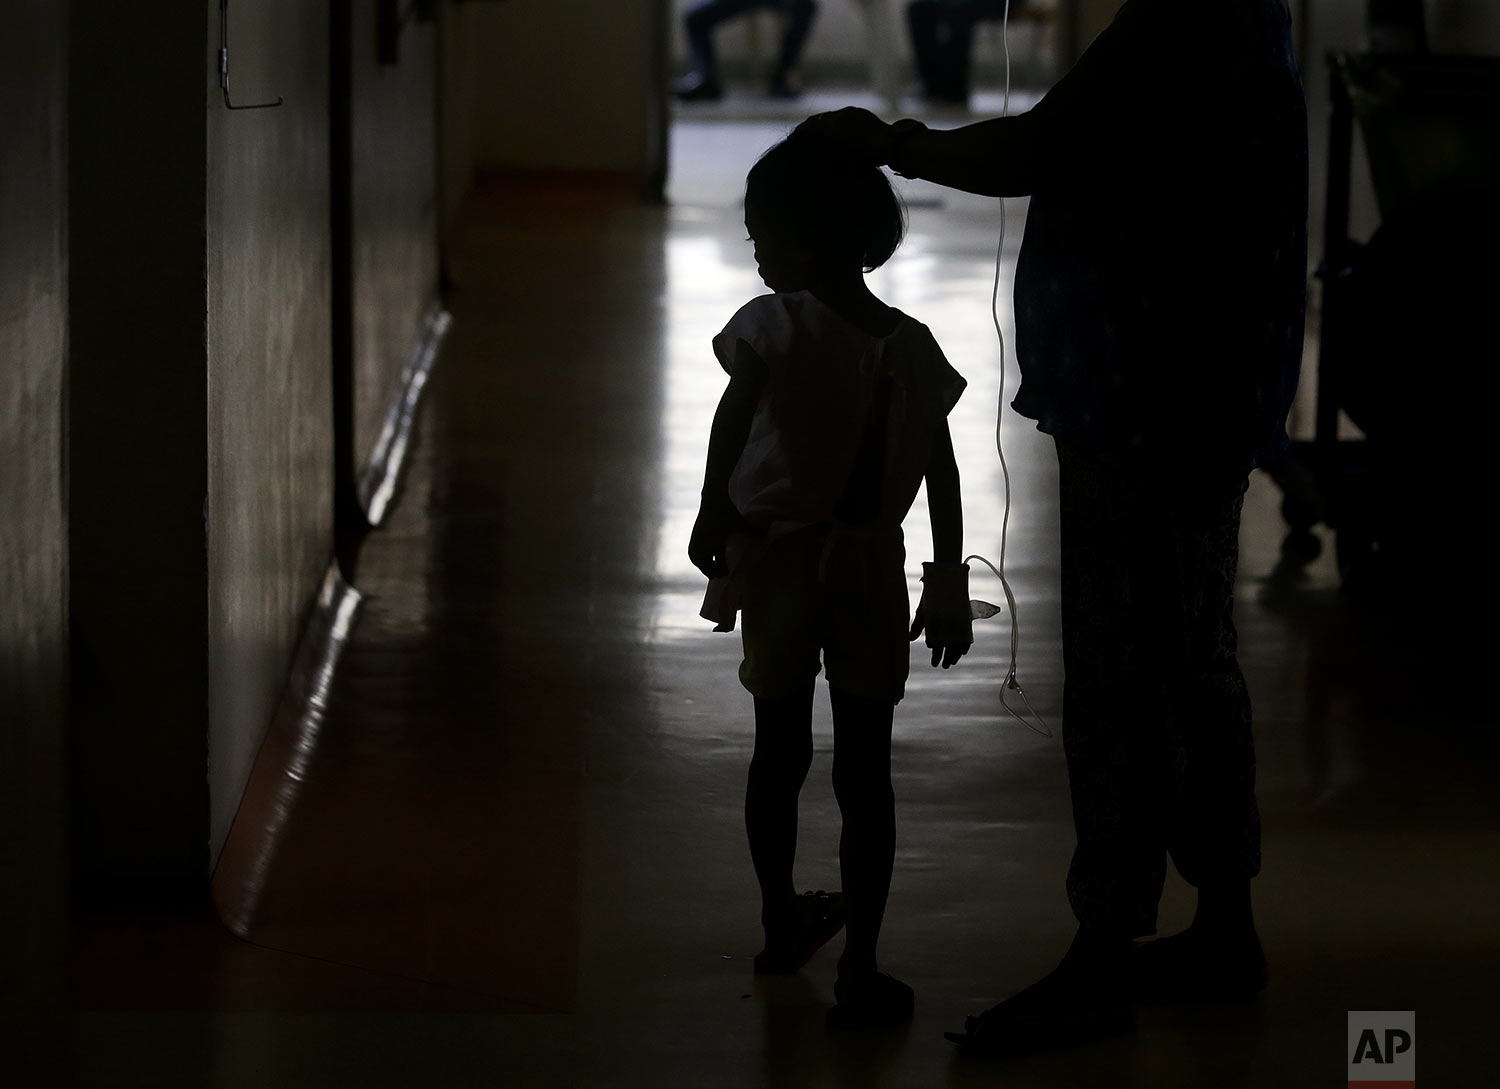  A young dengue patient walks inside the San Lazaro government hospital in Manila, Philippines on Wednesday, Aug. 7, 2019.  (AP Photo/Aaron Favila) 